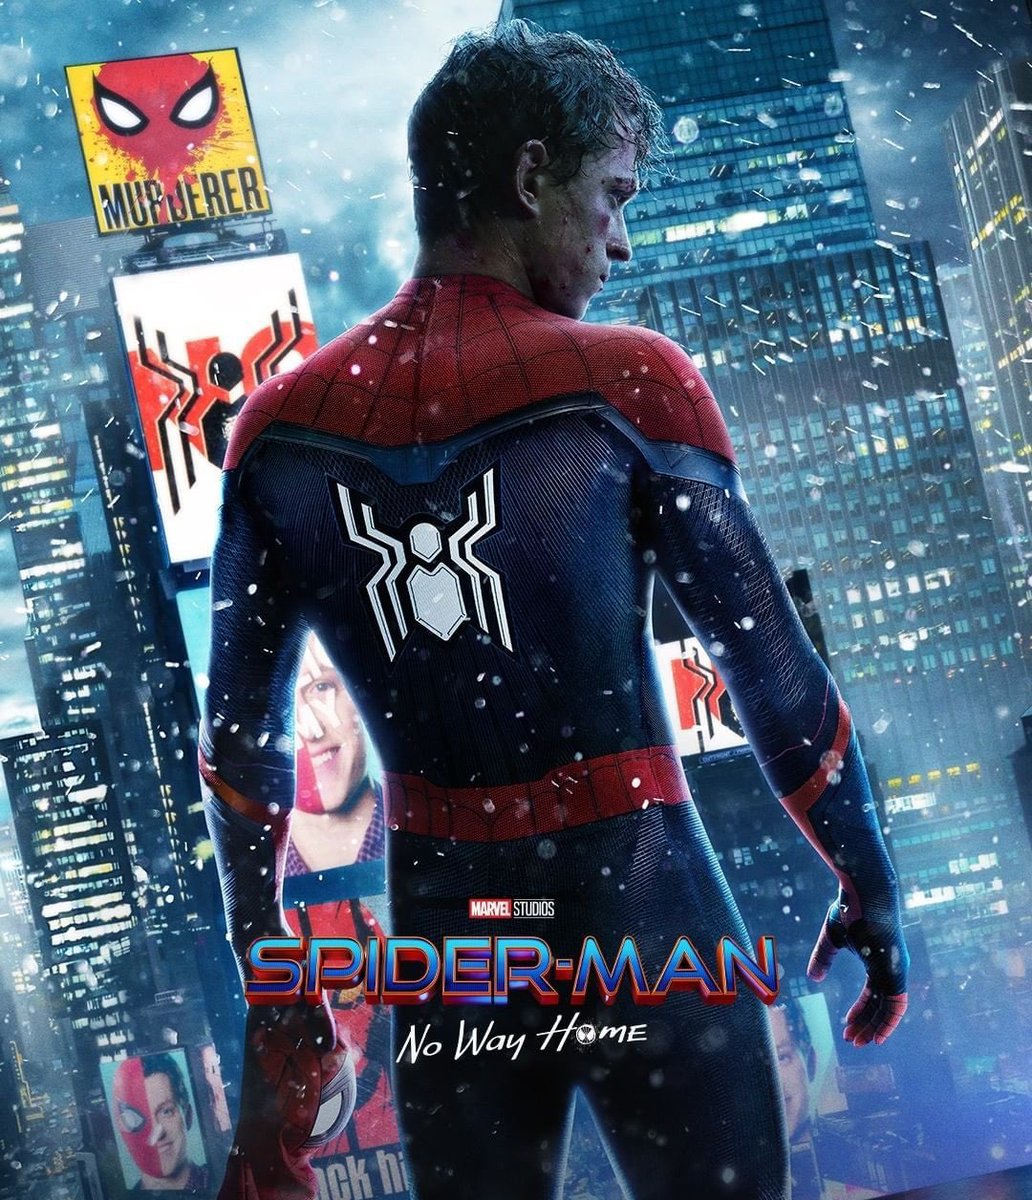 RT @civiiswar: the spider-man posters we waited for https://t.co/bVzsxpyMqx